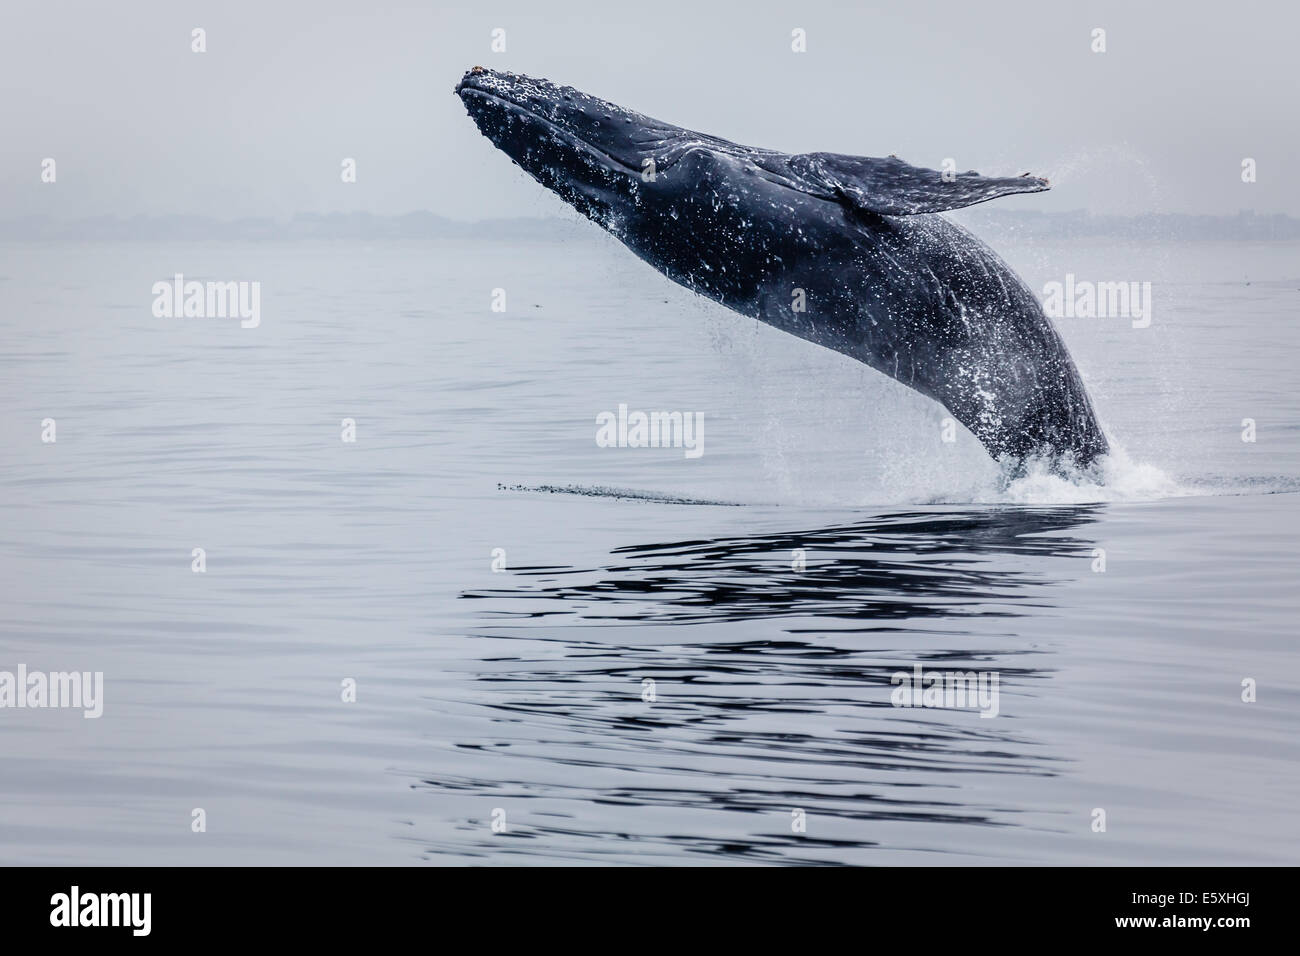 Close up of enormous humpback whale breaching the ocean off California coast Stock Photo